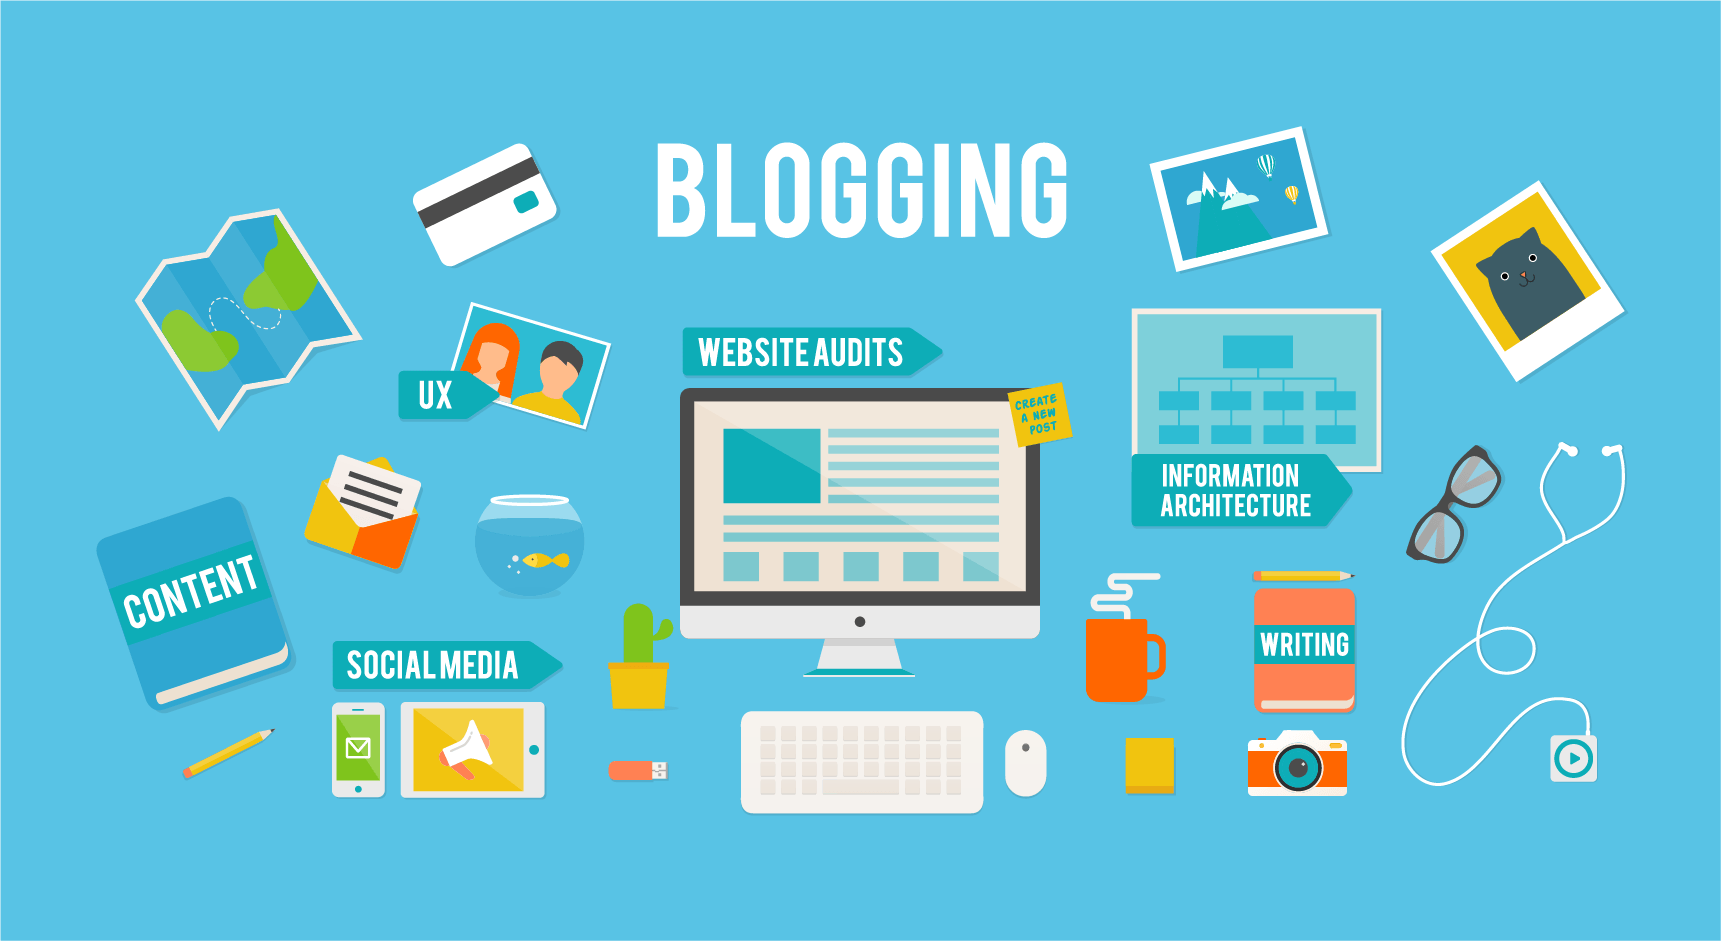 What Makes Blogs Such A Powerful Tool For SEO??